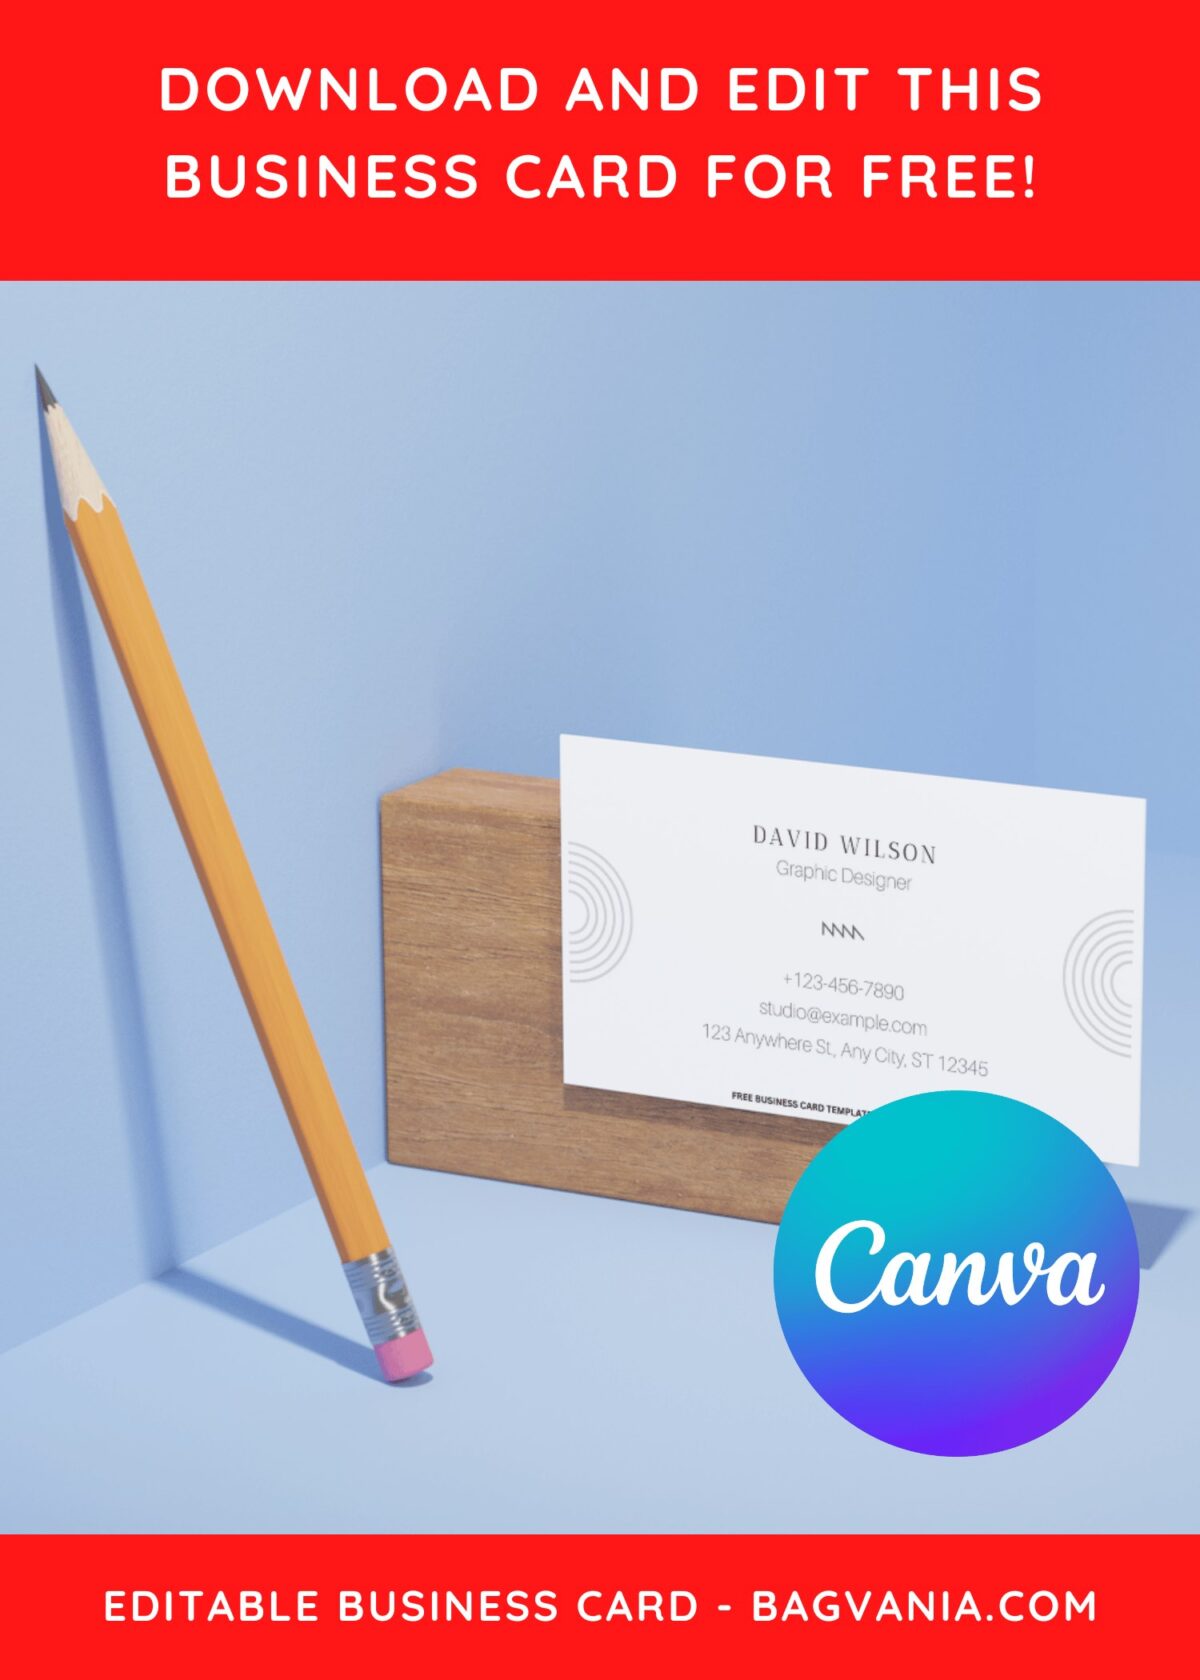 10+ Edgy Canva Business Card Templates I